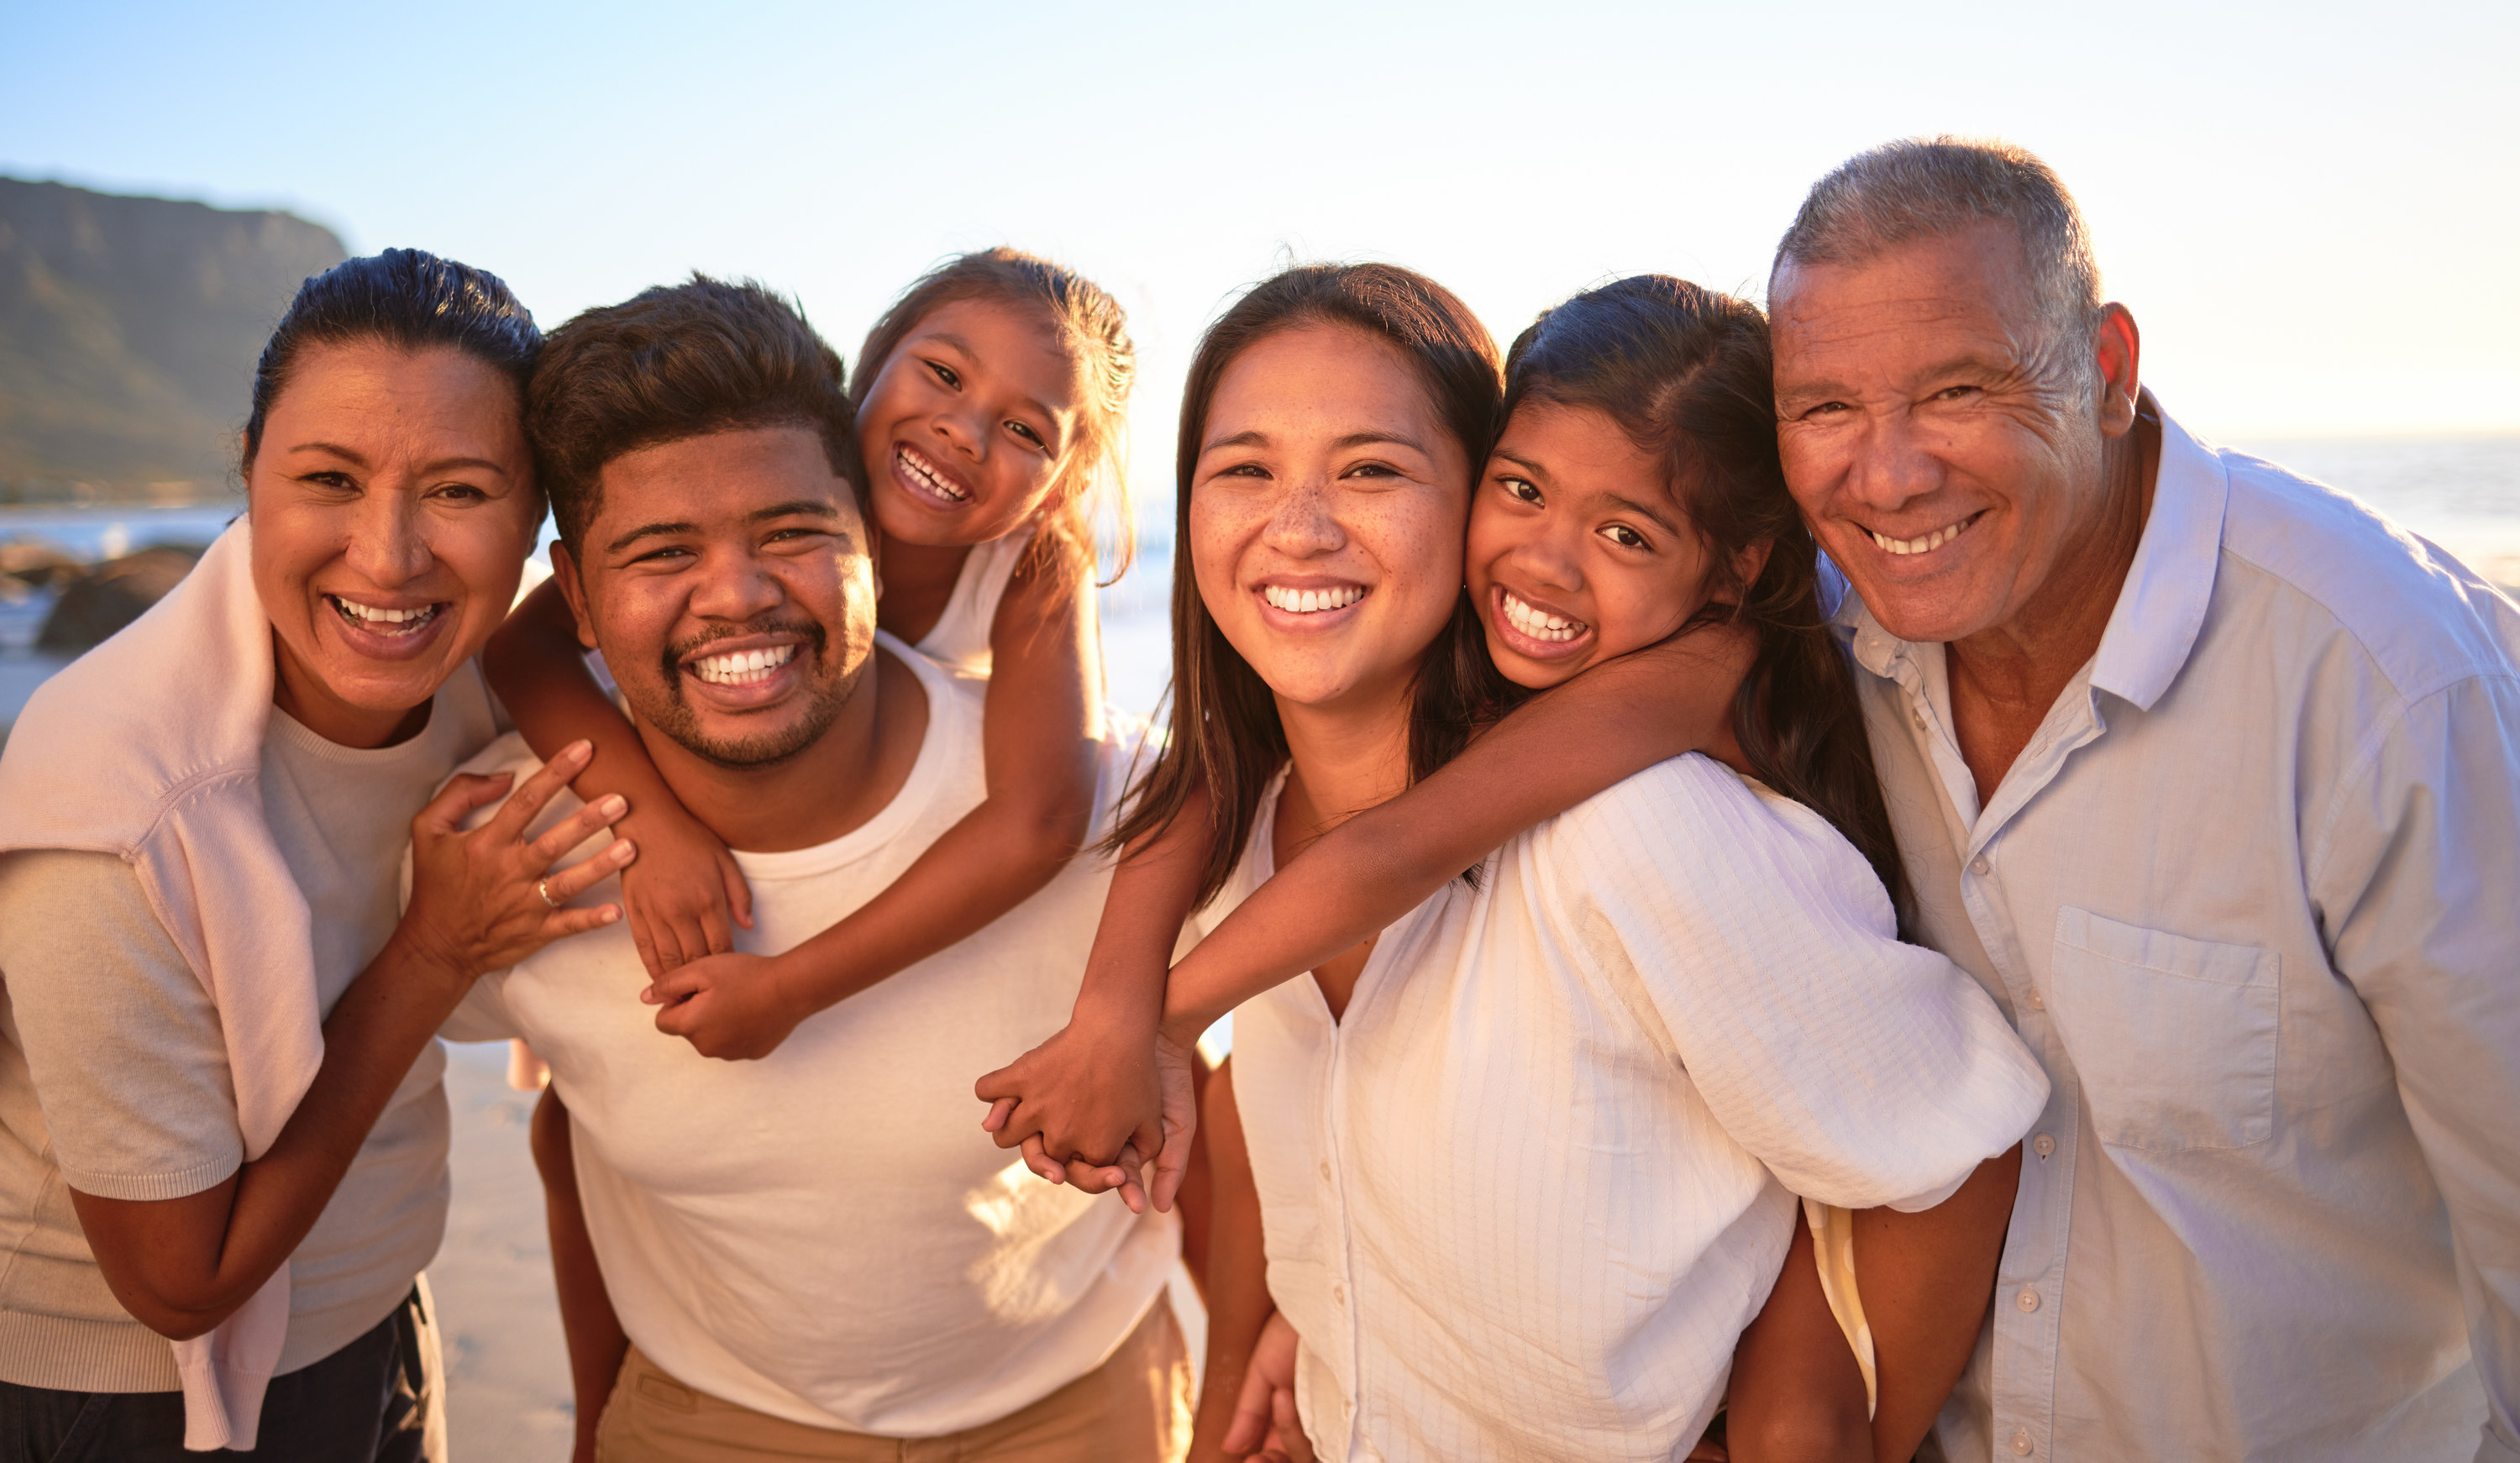 A multicultural family smiling and all wearing white